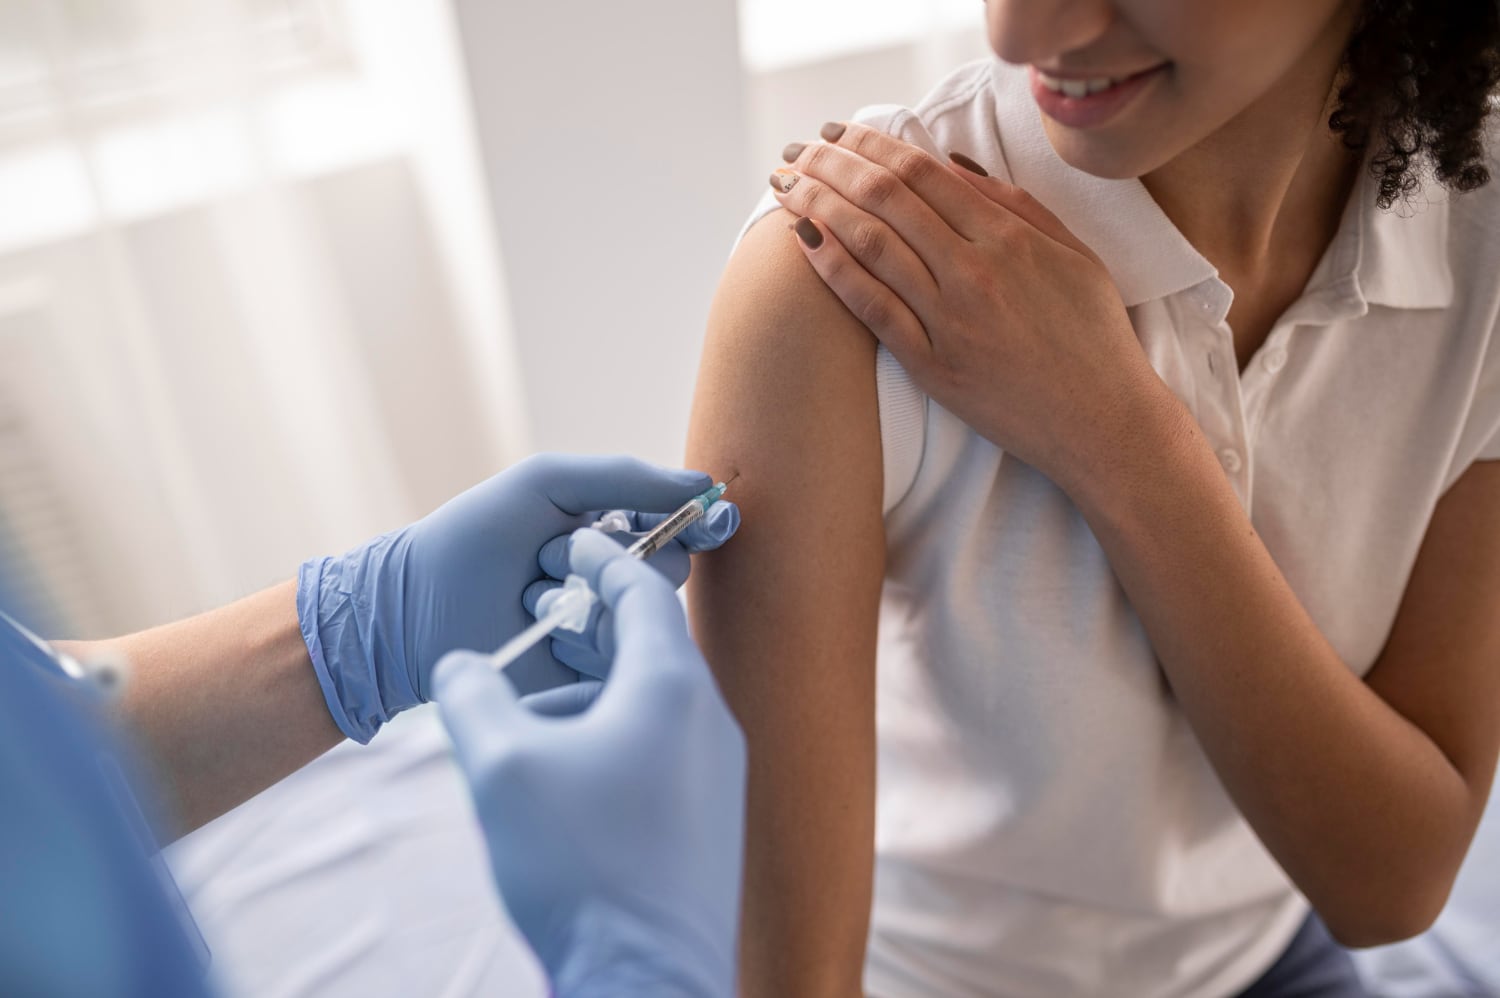 COVID vaccination in your company. What conditions must be met?